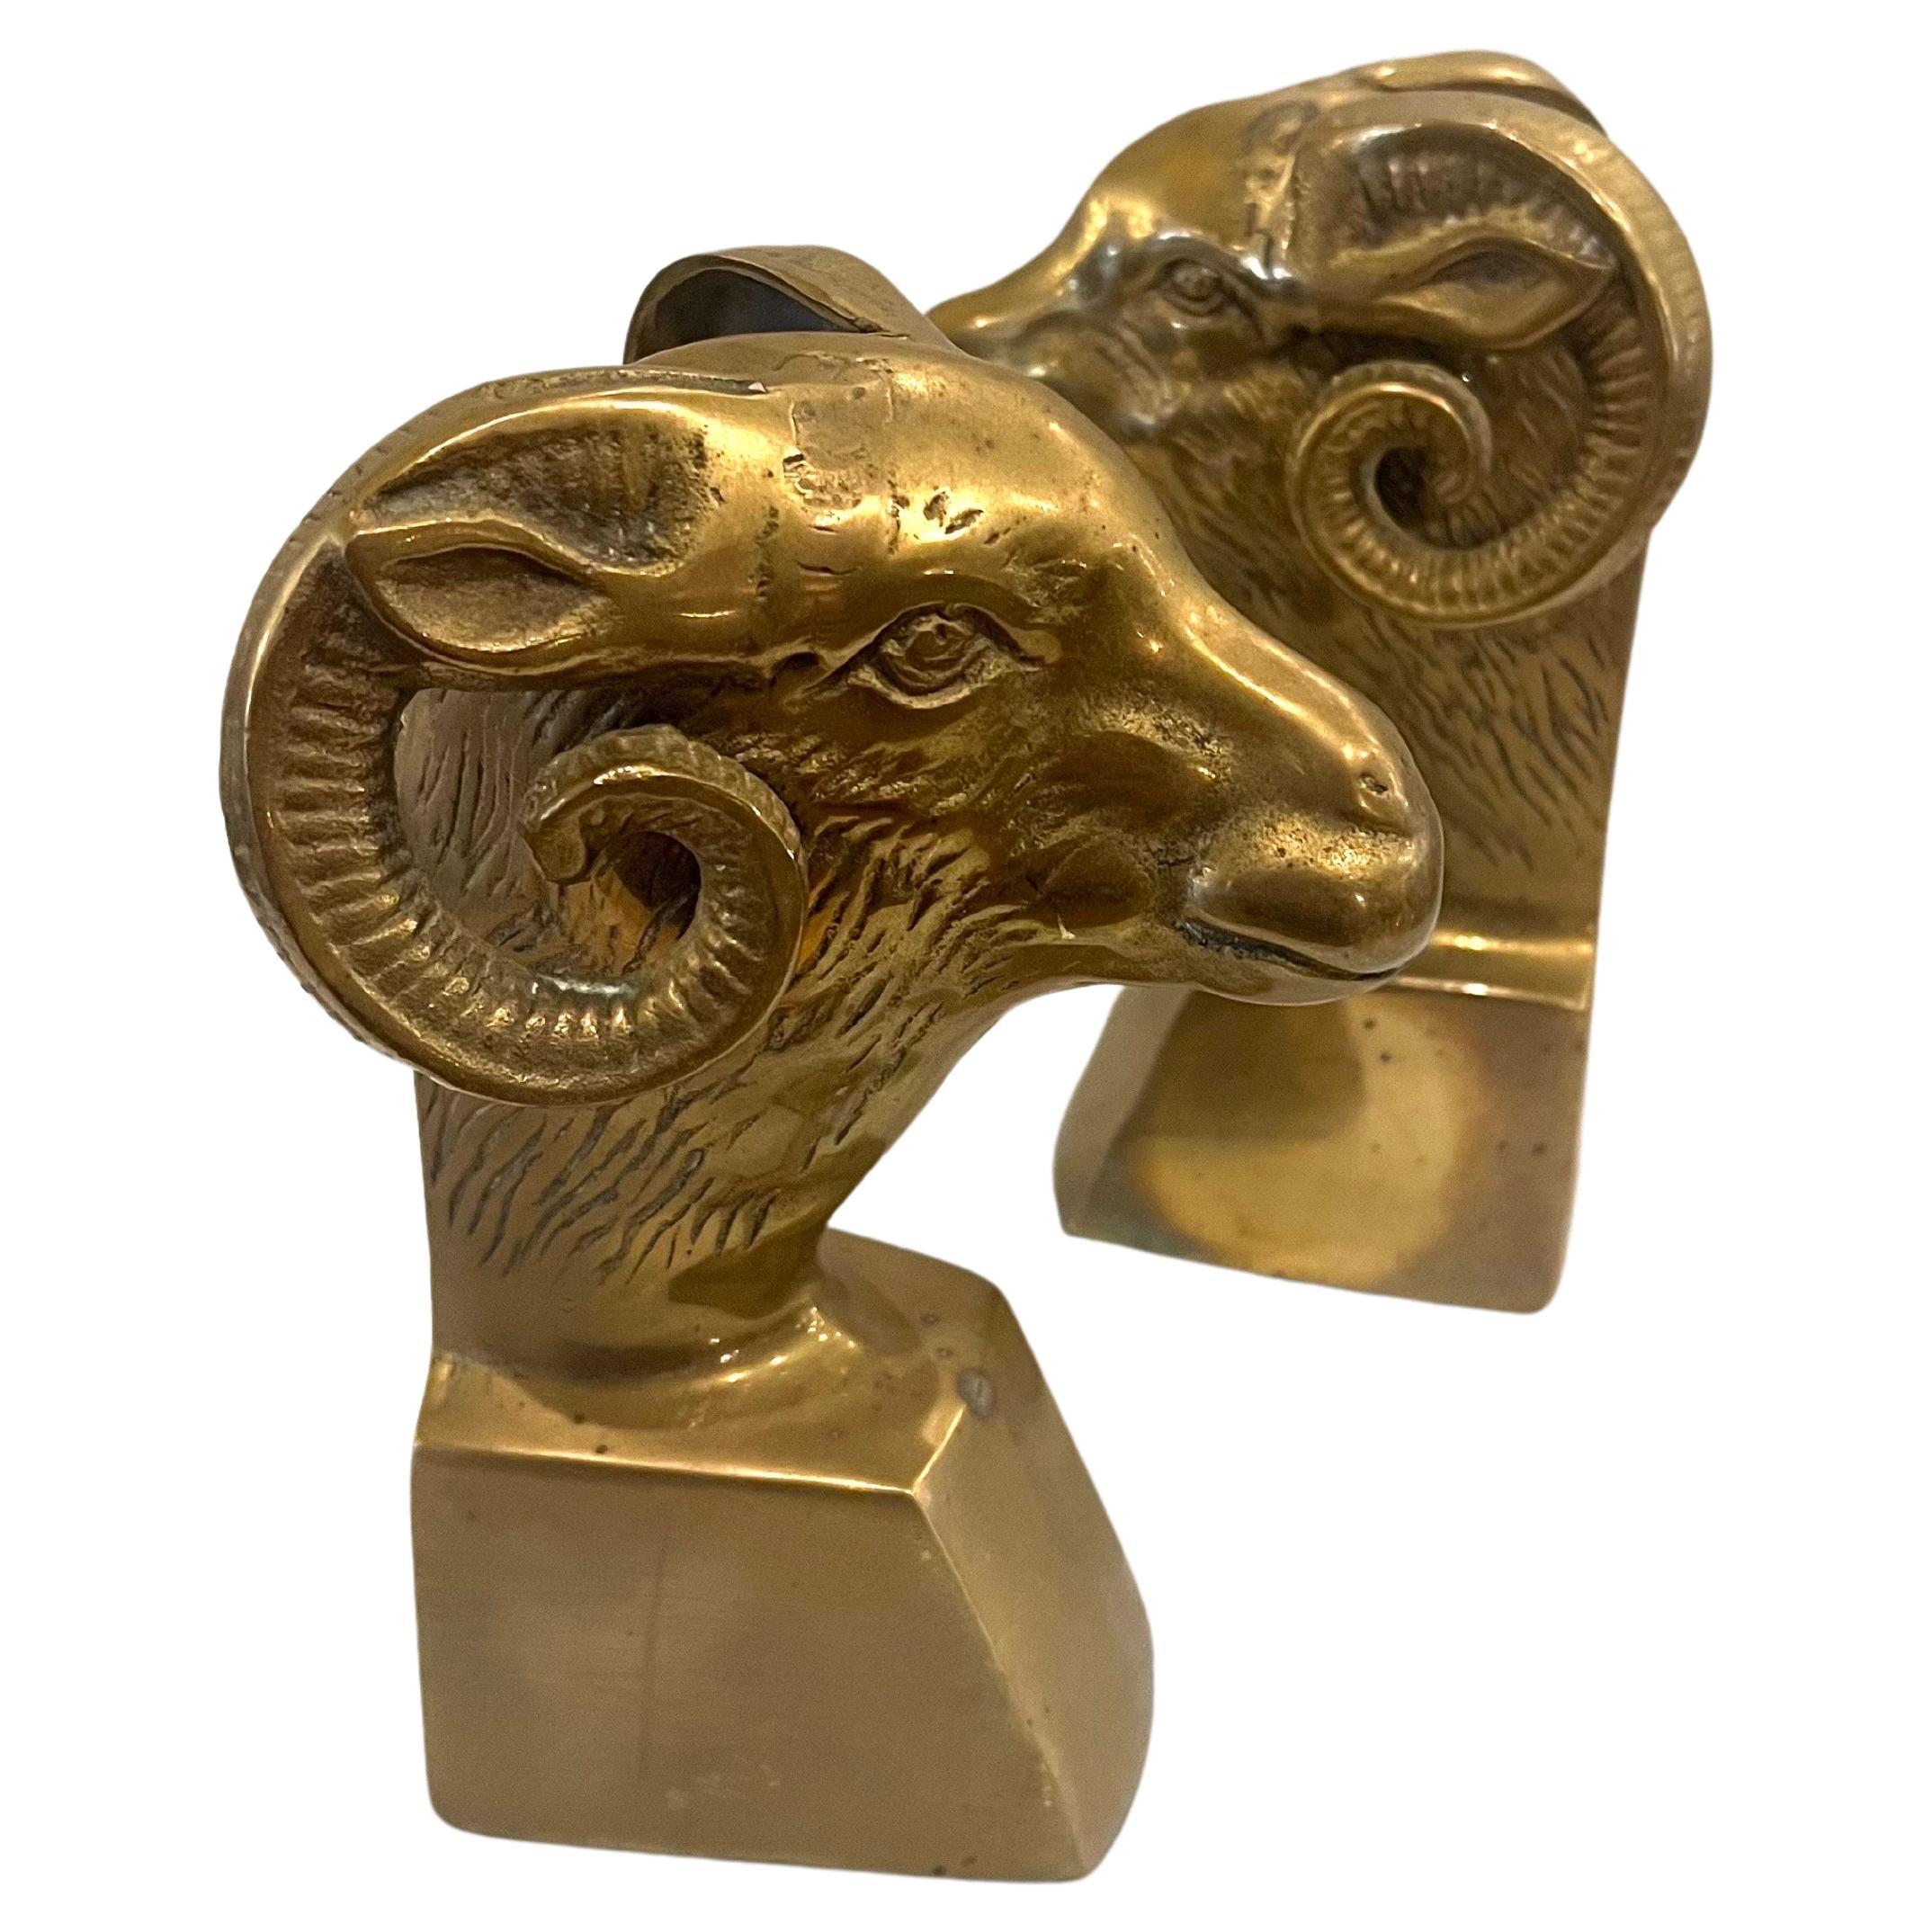 A pair of vintage brass rams head bookends, circa 1970s. The bookends are in very good condition nice patina.



